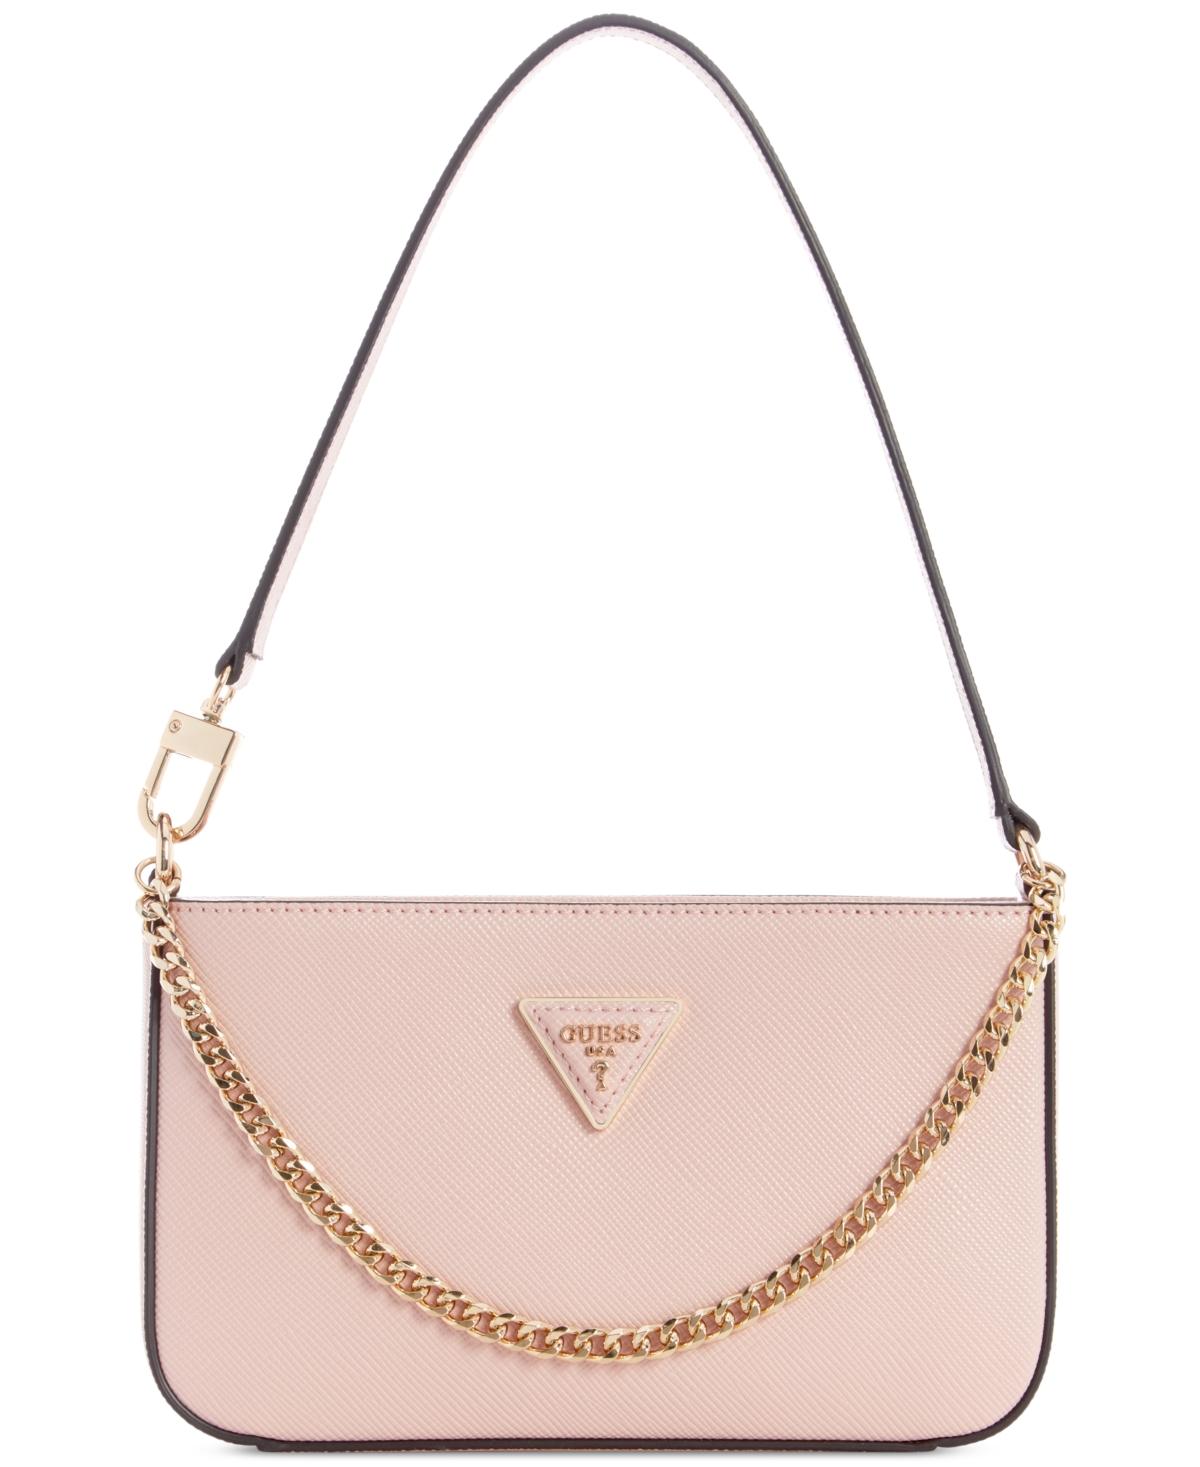 Guess Brynlee Small Top Zip Shoulder Bag in Pink | Lyst